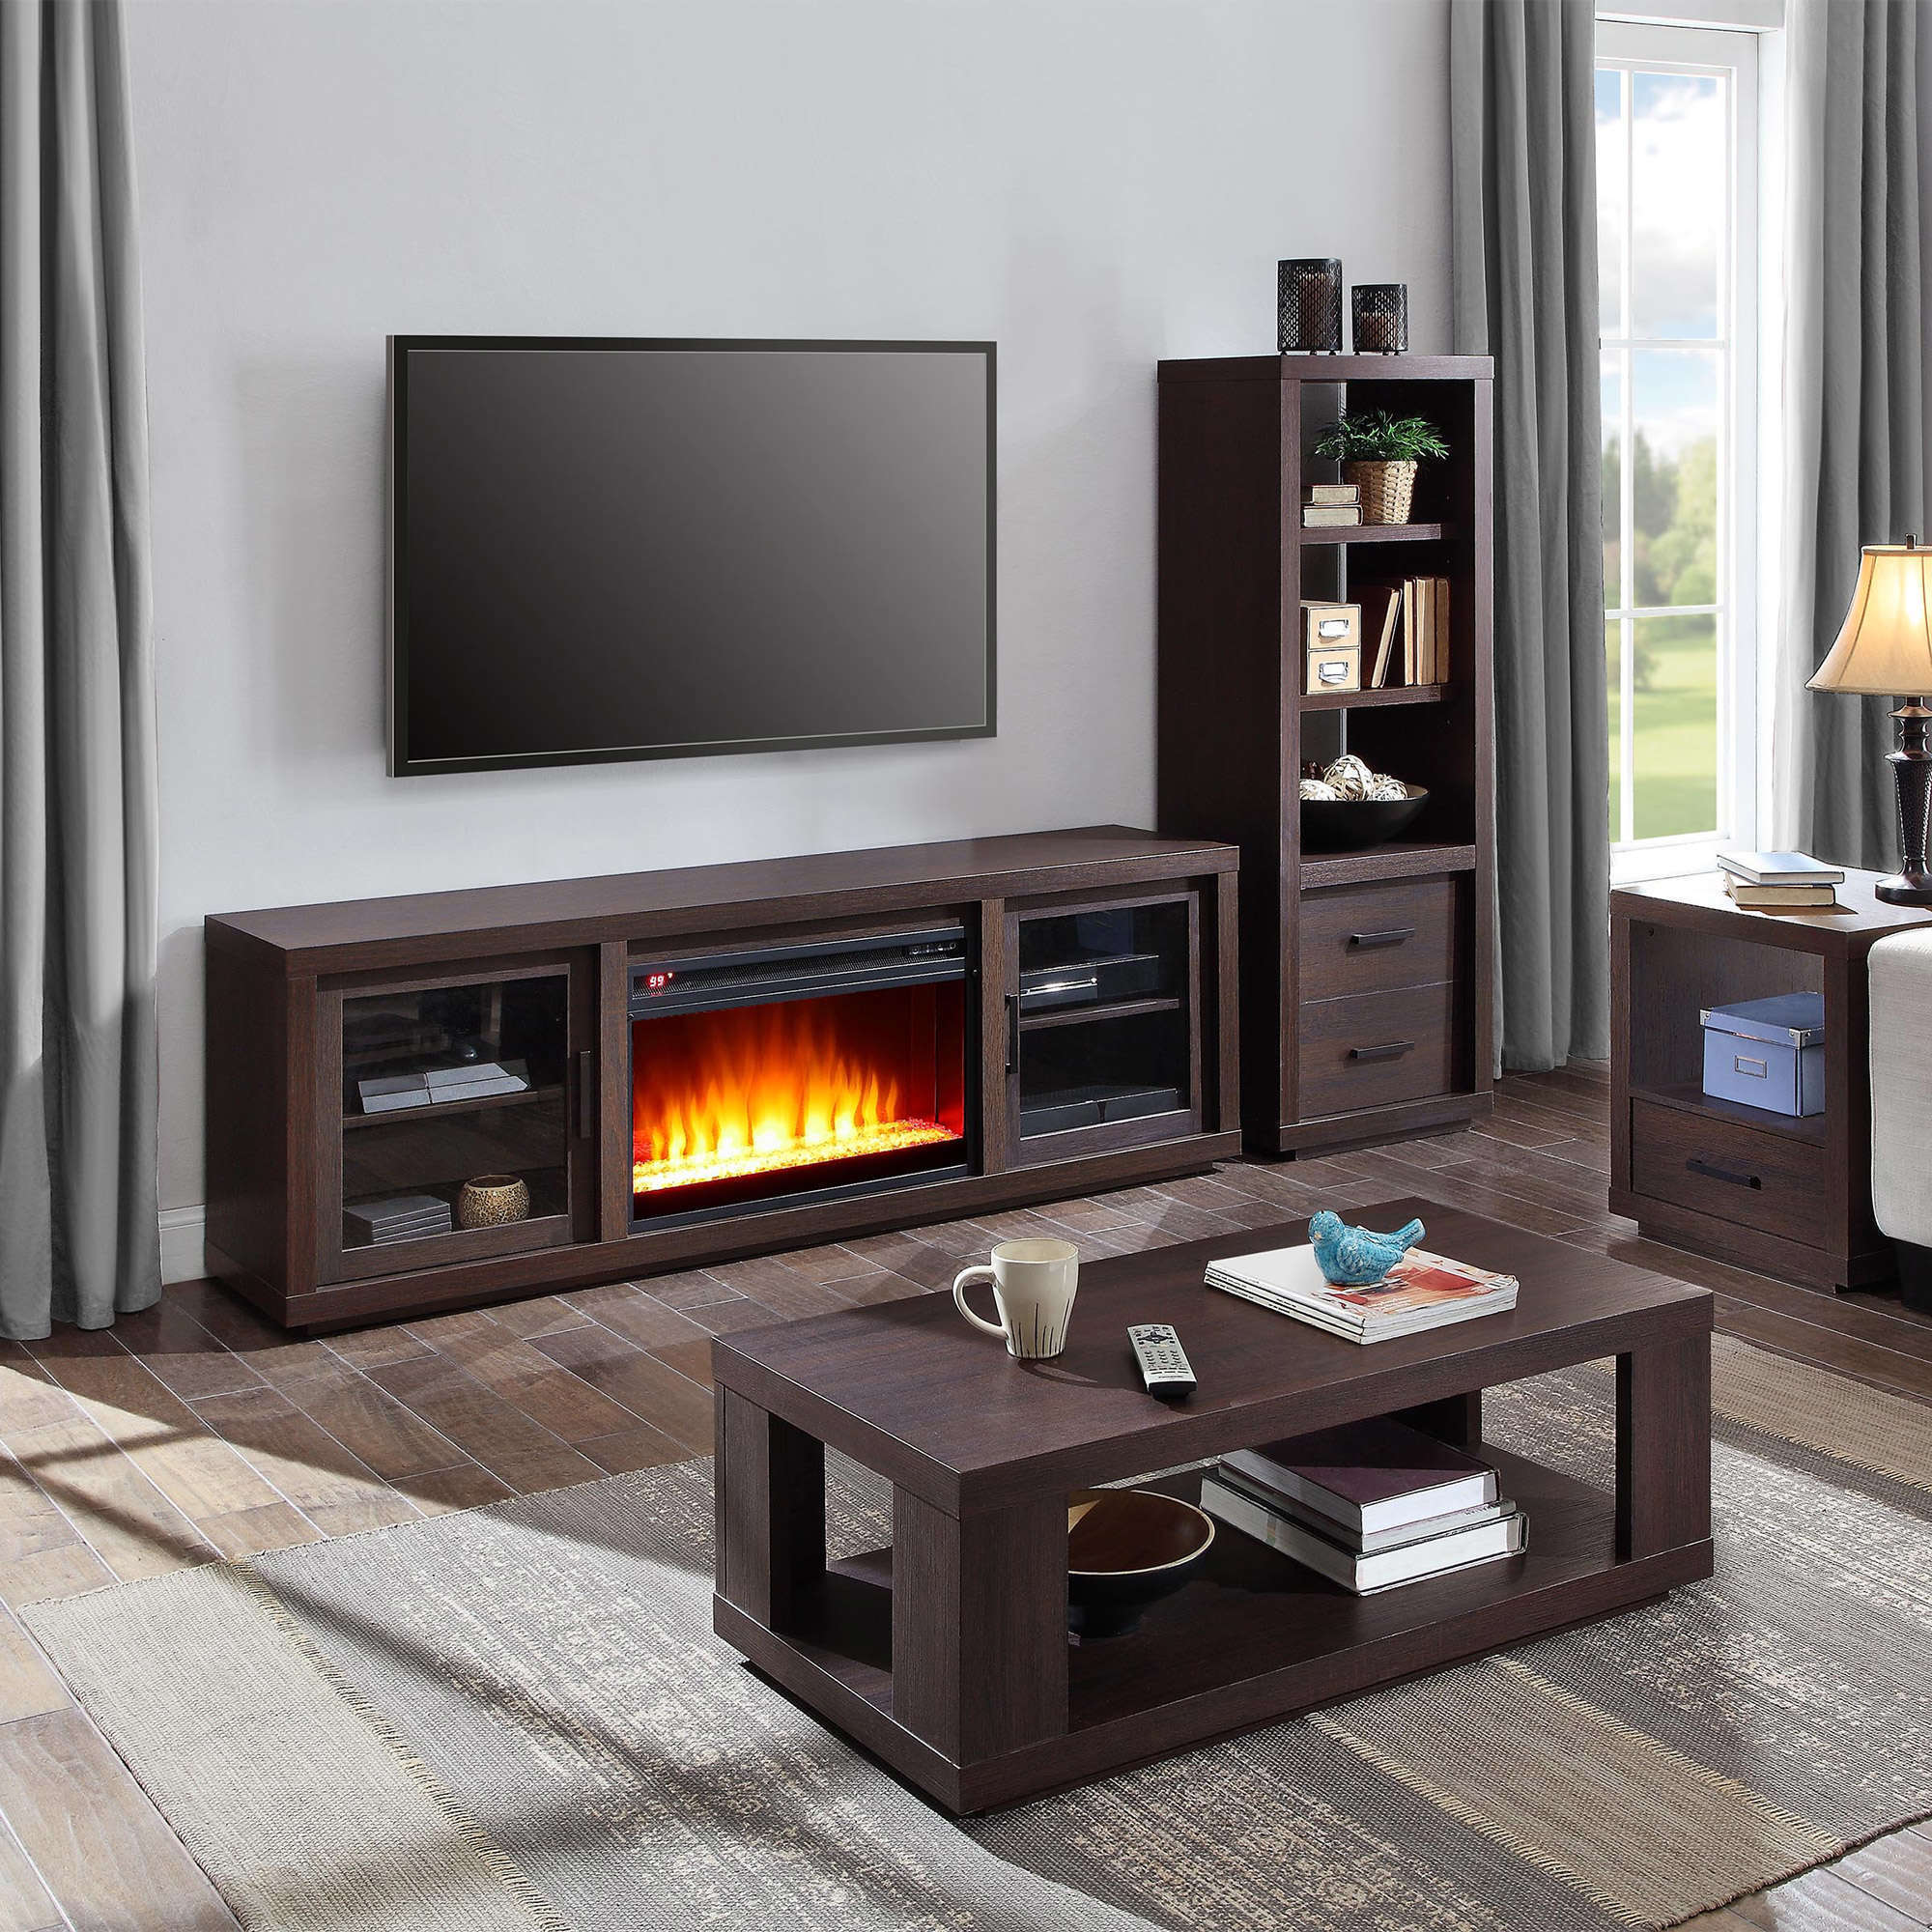 Better Homes & Gardens Steele Media Fireplace Console Television Stand for TVs up to 80" Espresso Finish - image 5 of 9